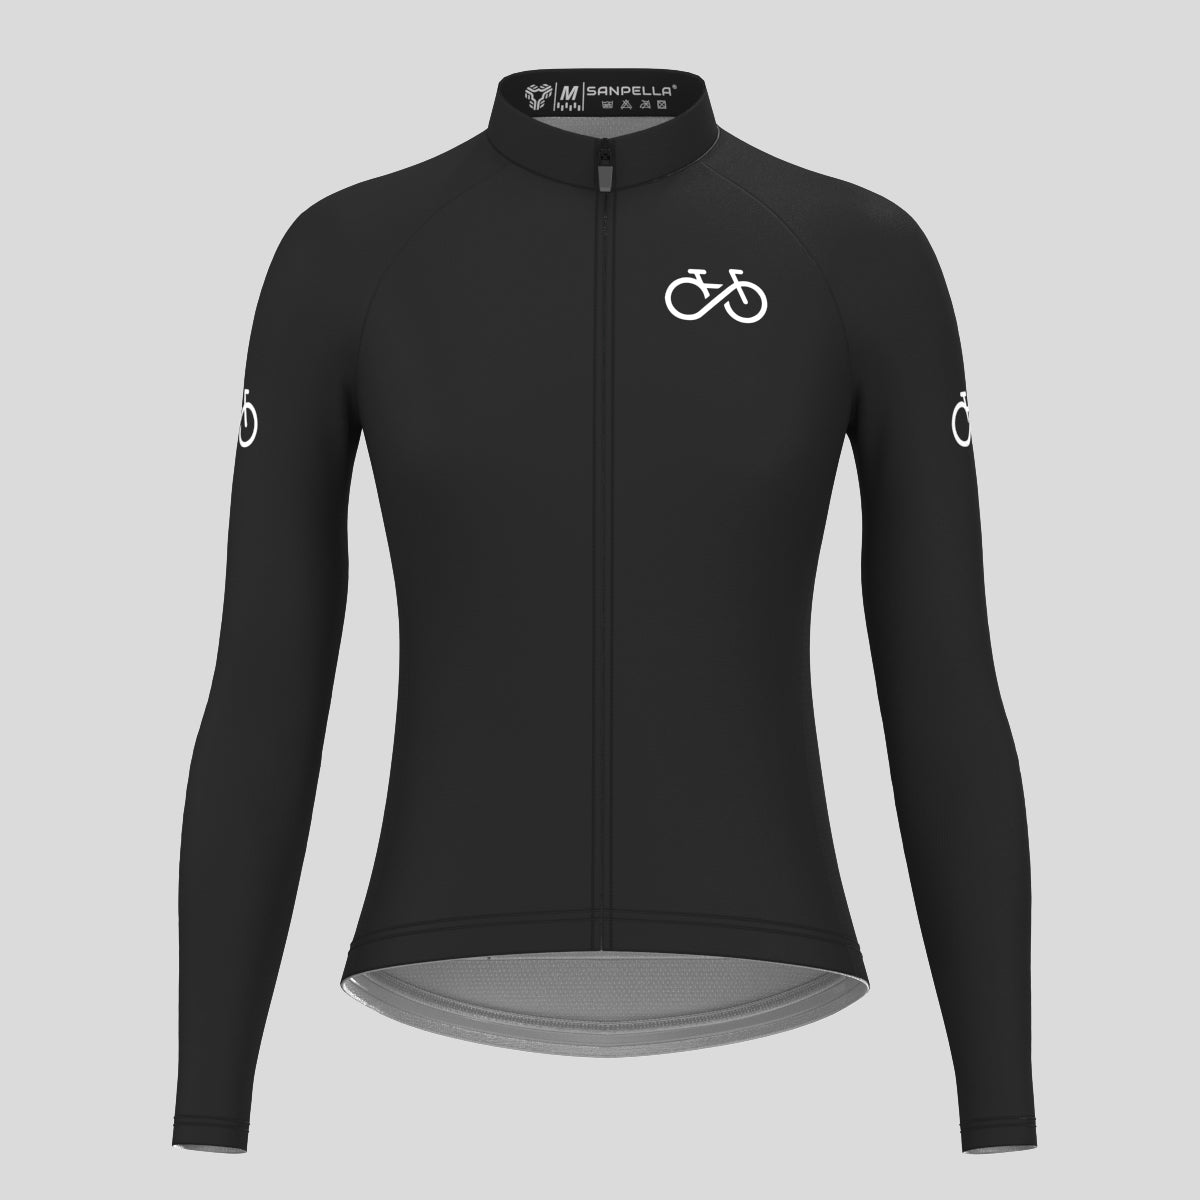 Ride Forever Women's LS Cycling Jersey - Black